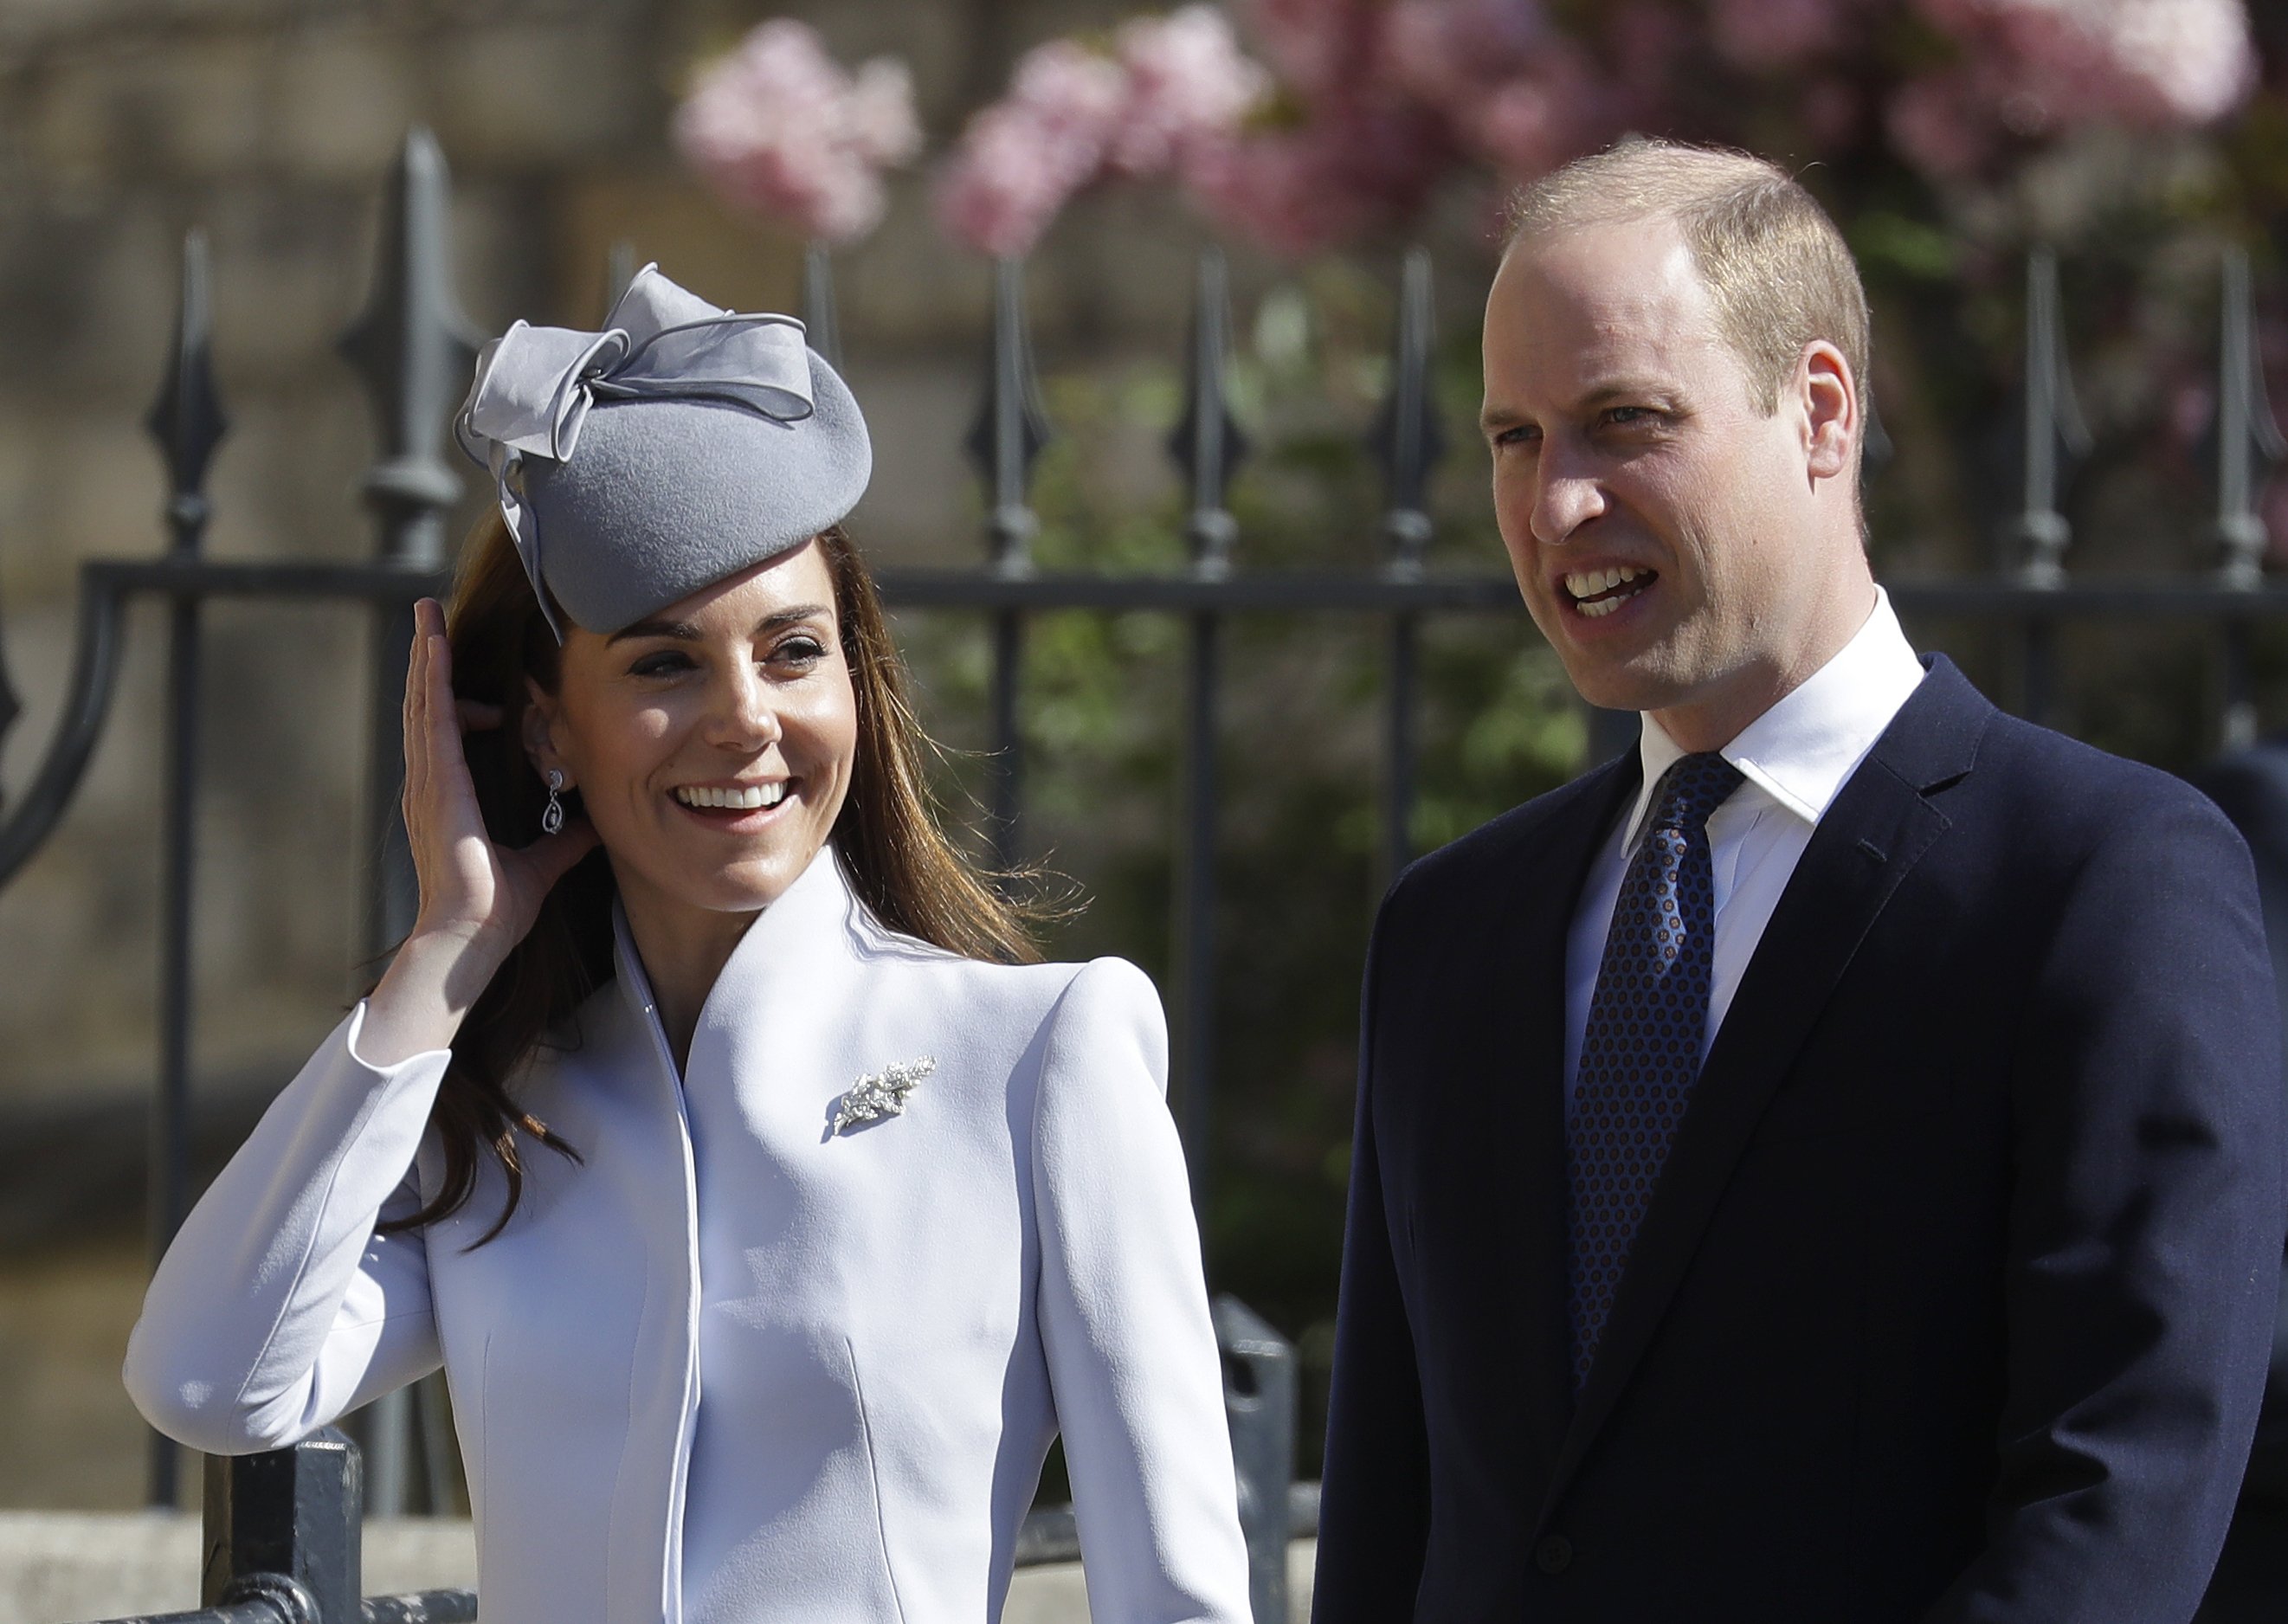 Prince William and Kate Middleton at the Easter Sunday service at St George's Chapel | Photo: Getty Images